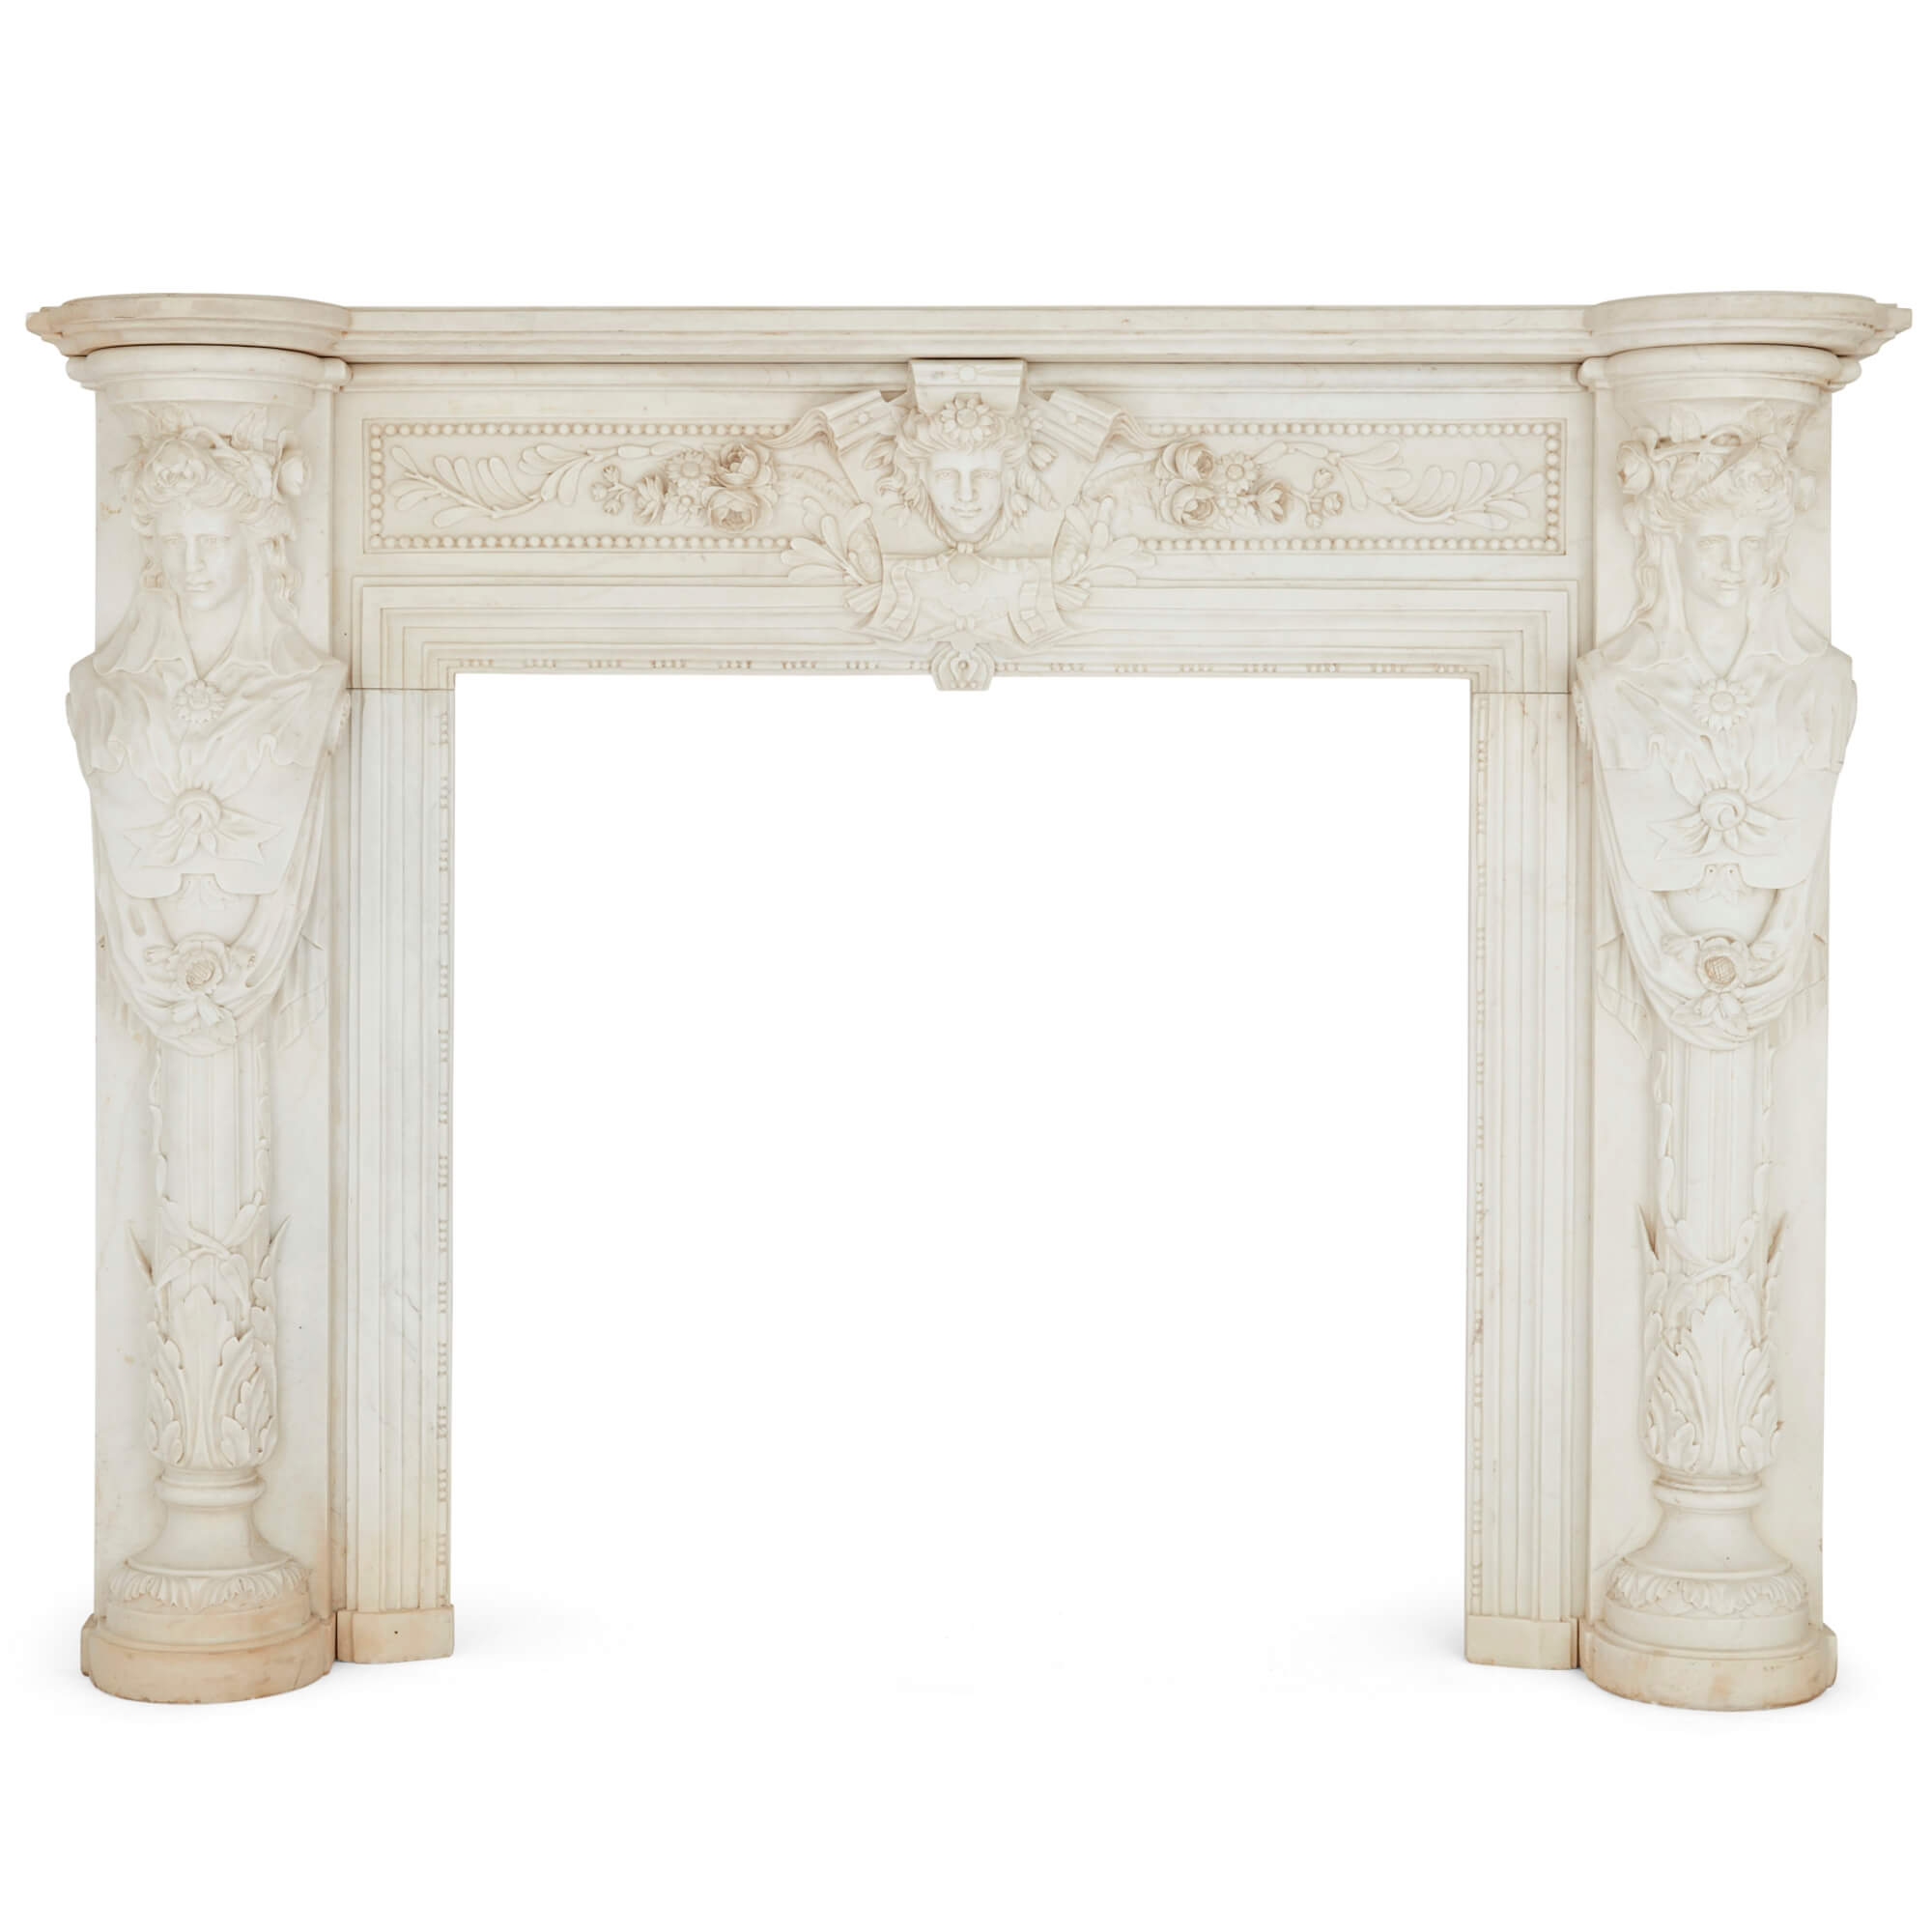 Antique Large White Marble Fireplace, French 19th Century